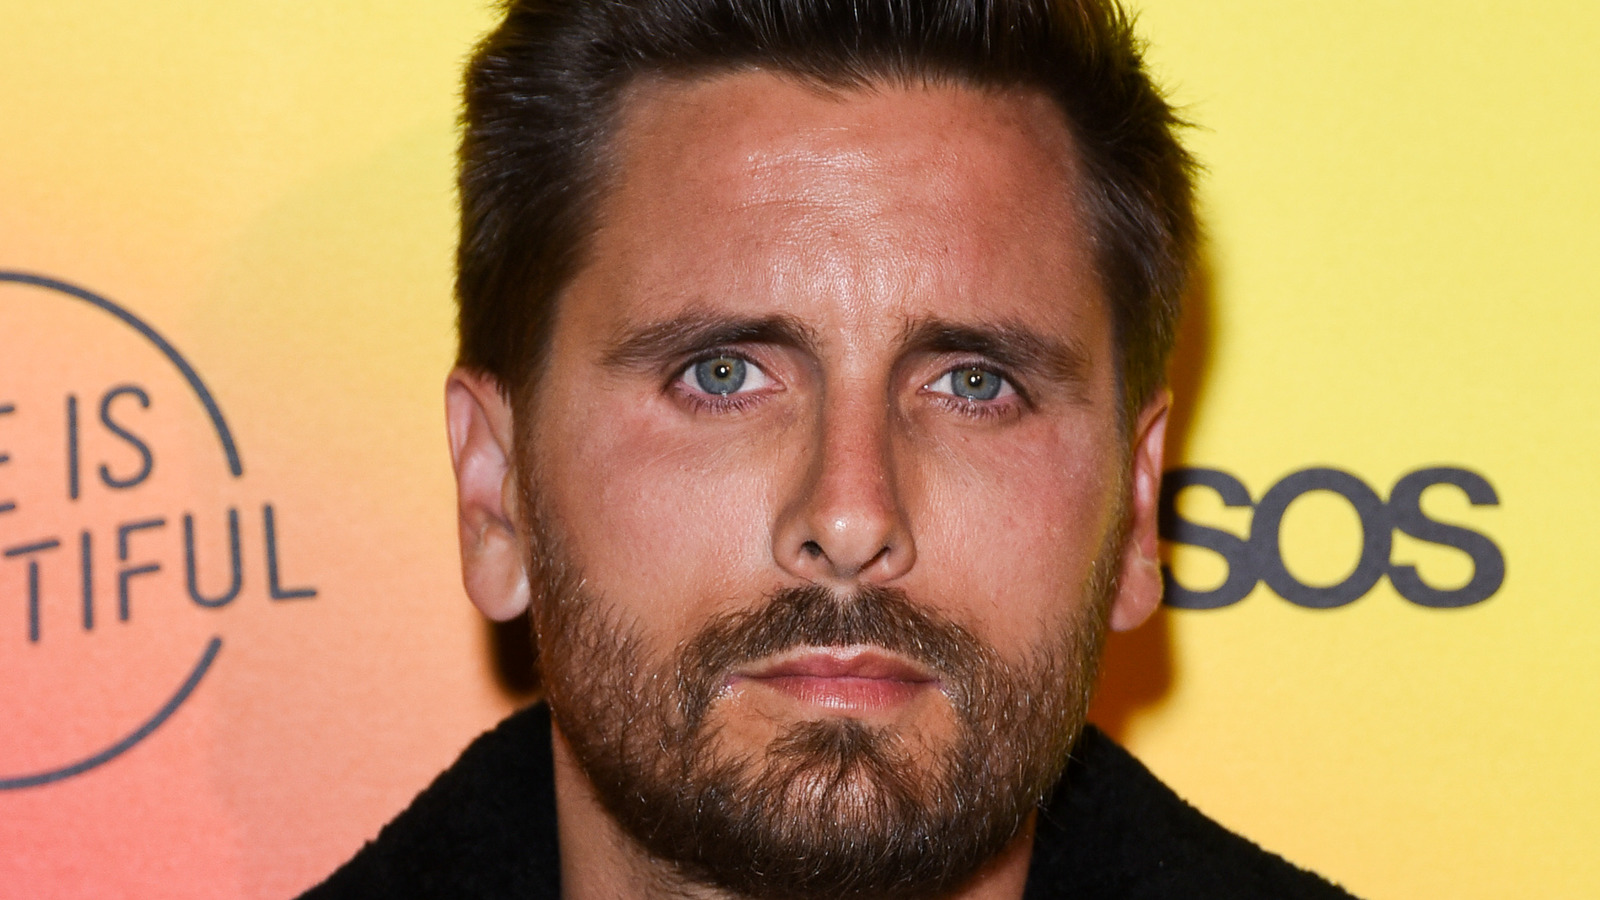 This Is Why Scott Disick's Restaurant Flopped